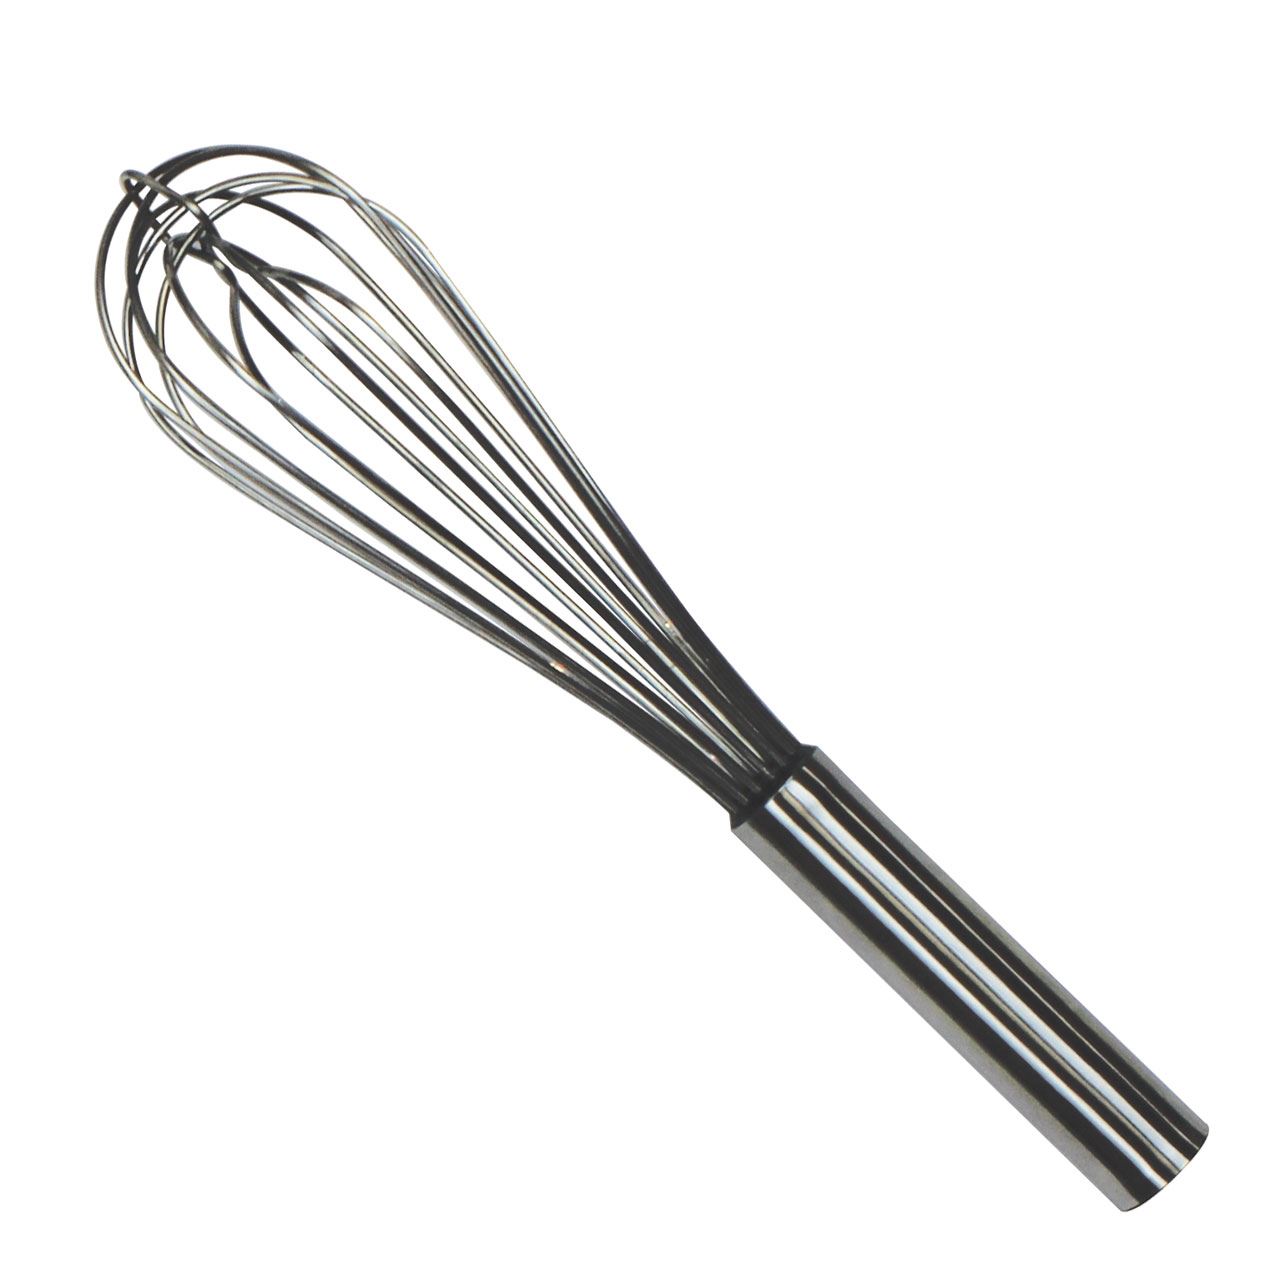 12" Milk Replacer Mixing Whisk